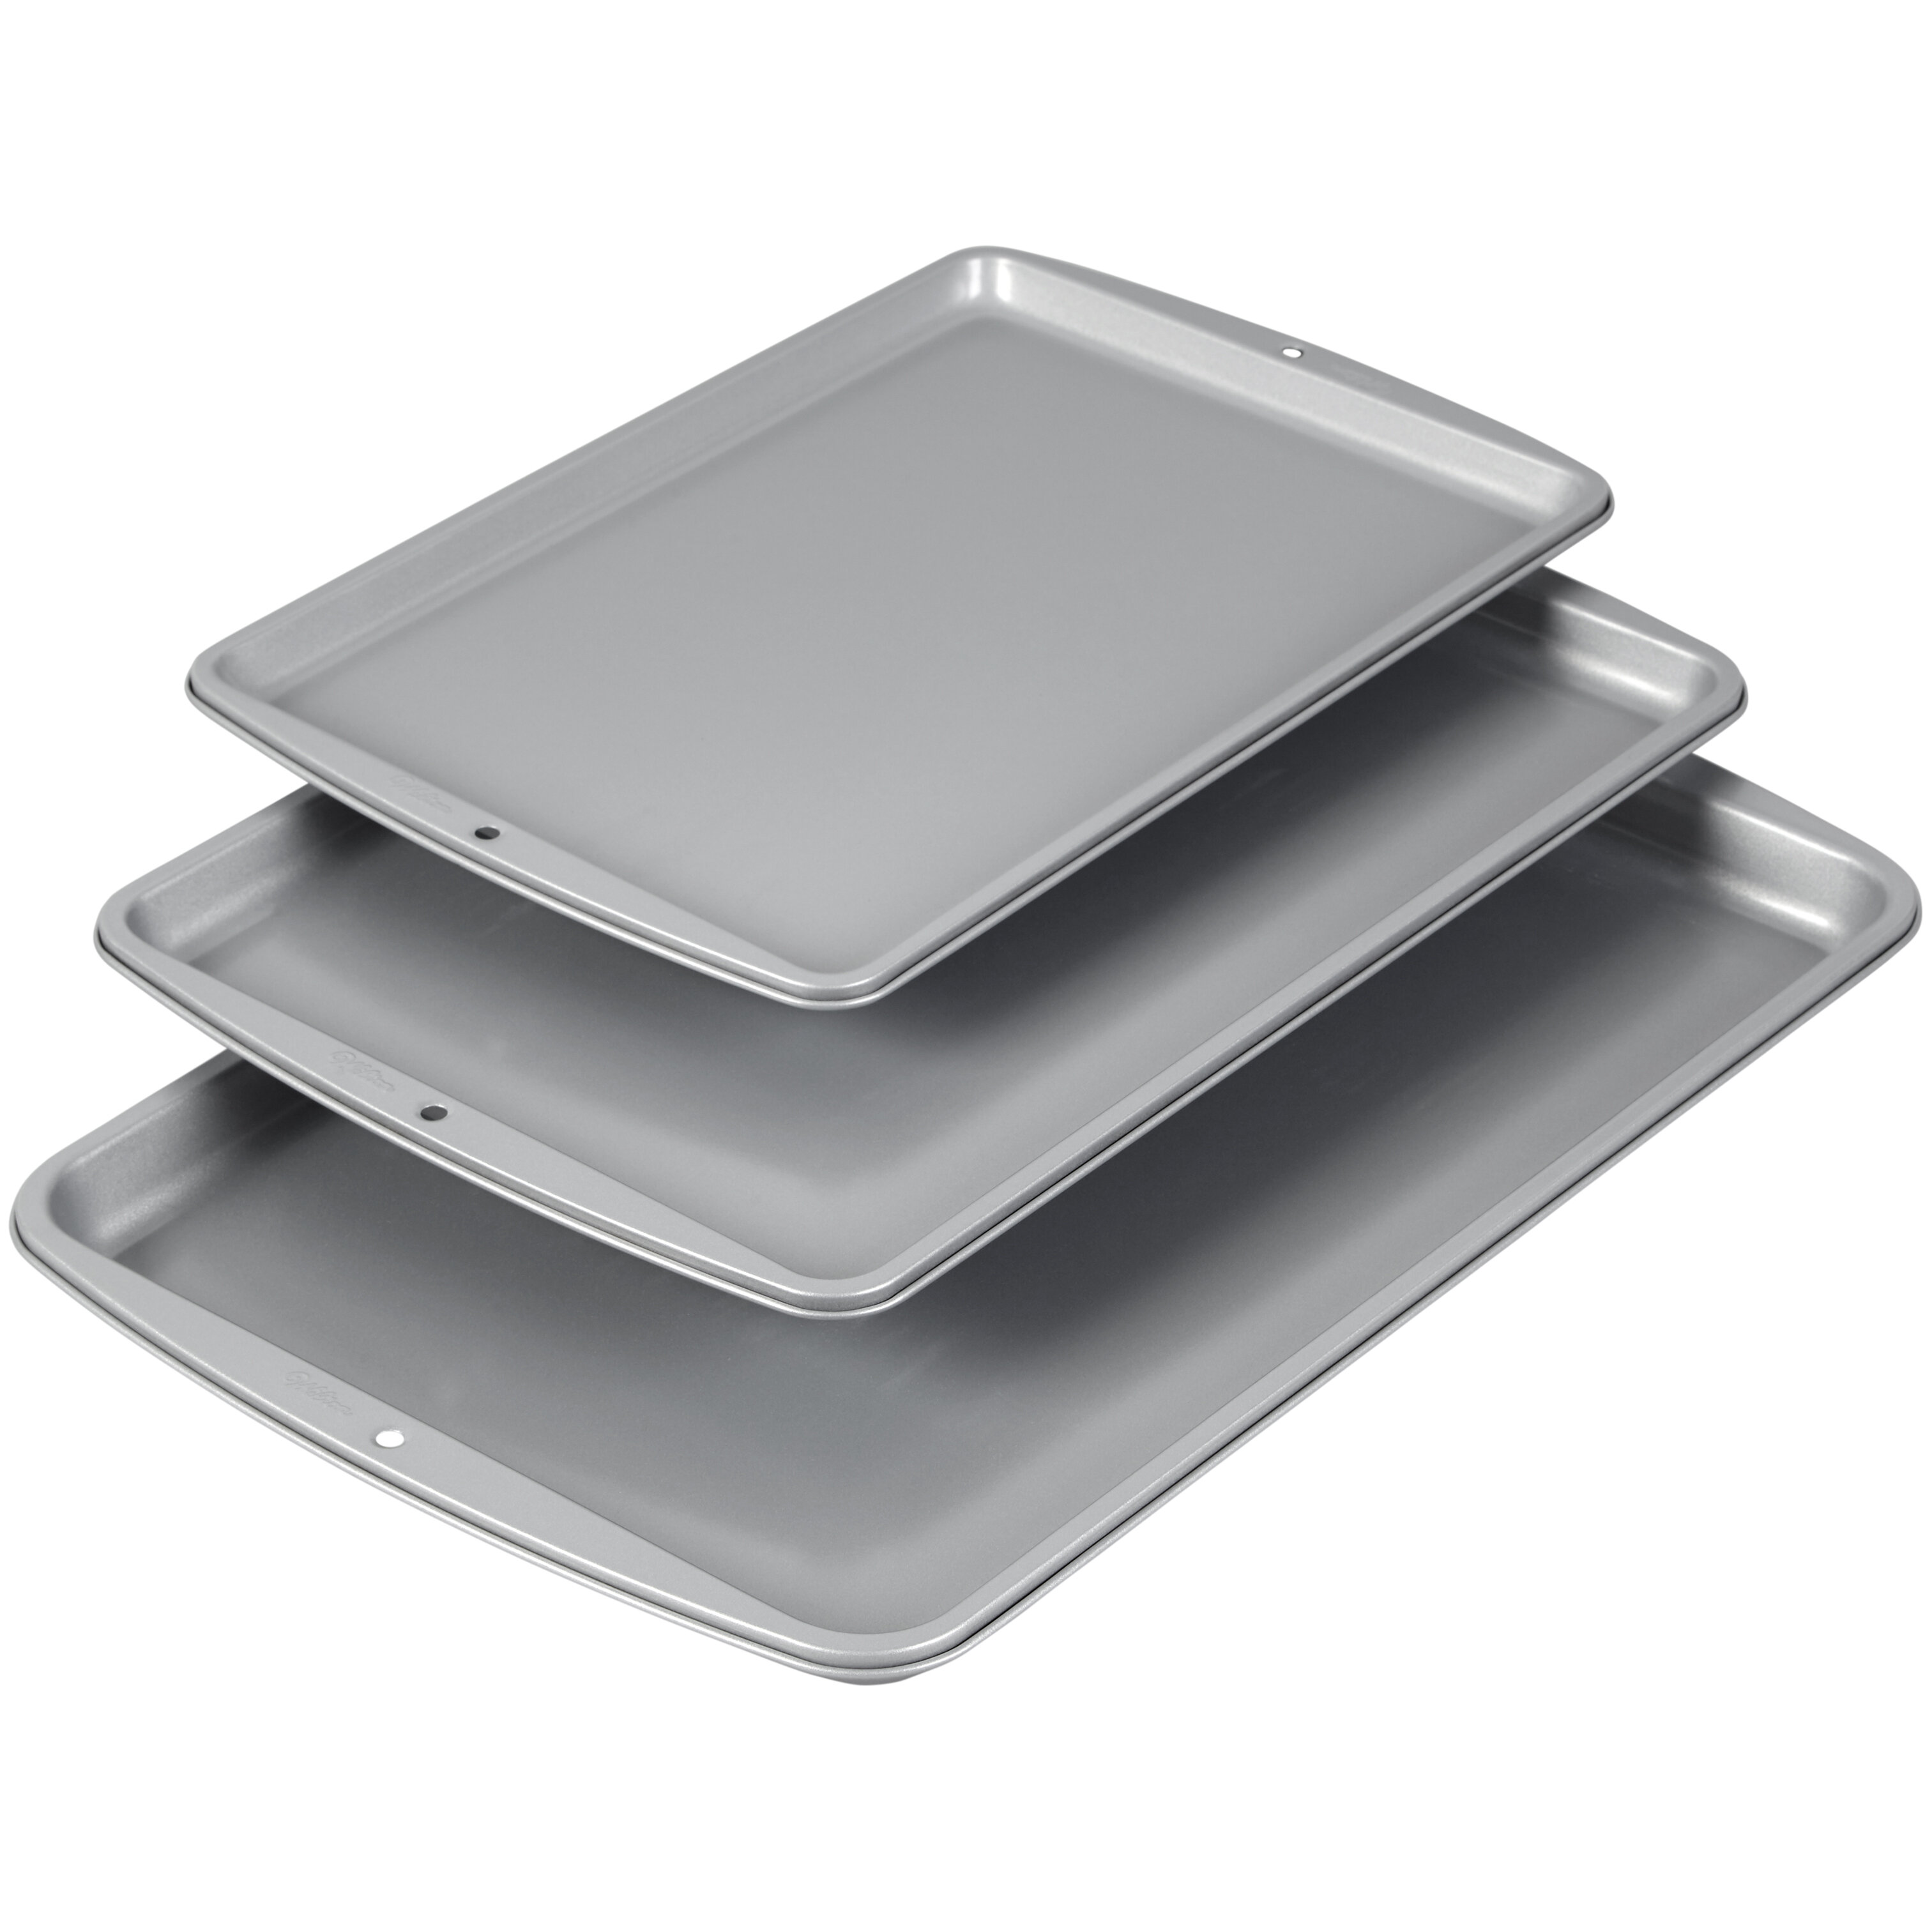 Product review: Wilton Holiday Air Insulated Cookie Sheets